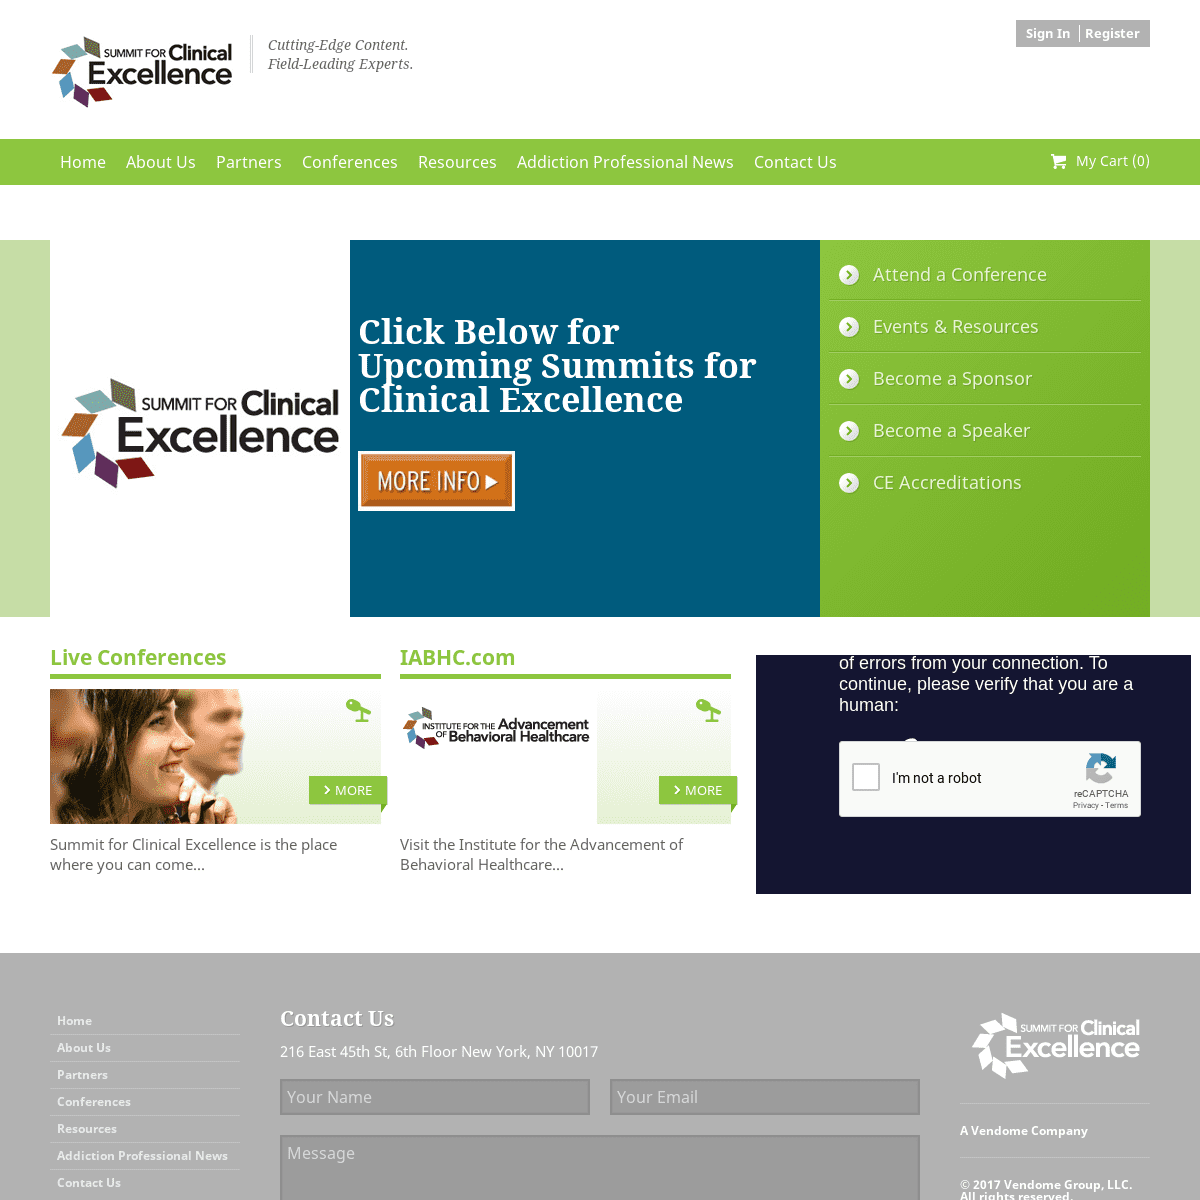 A complete backup of summitforclinicalexcellence.com